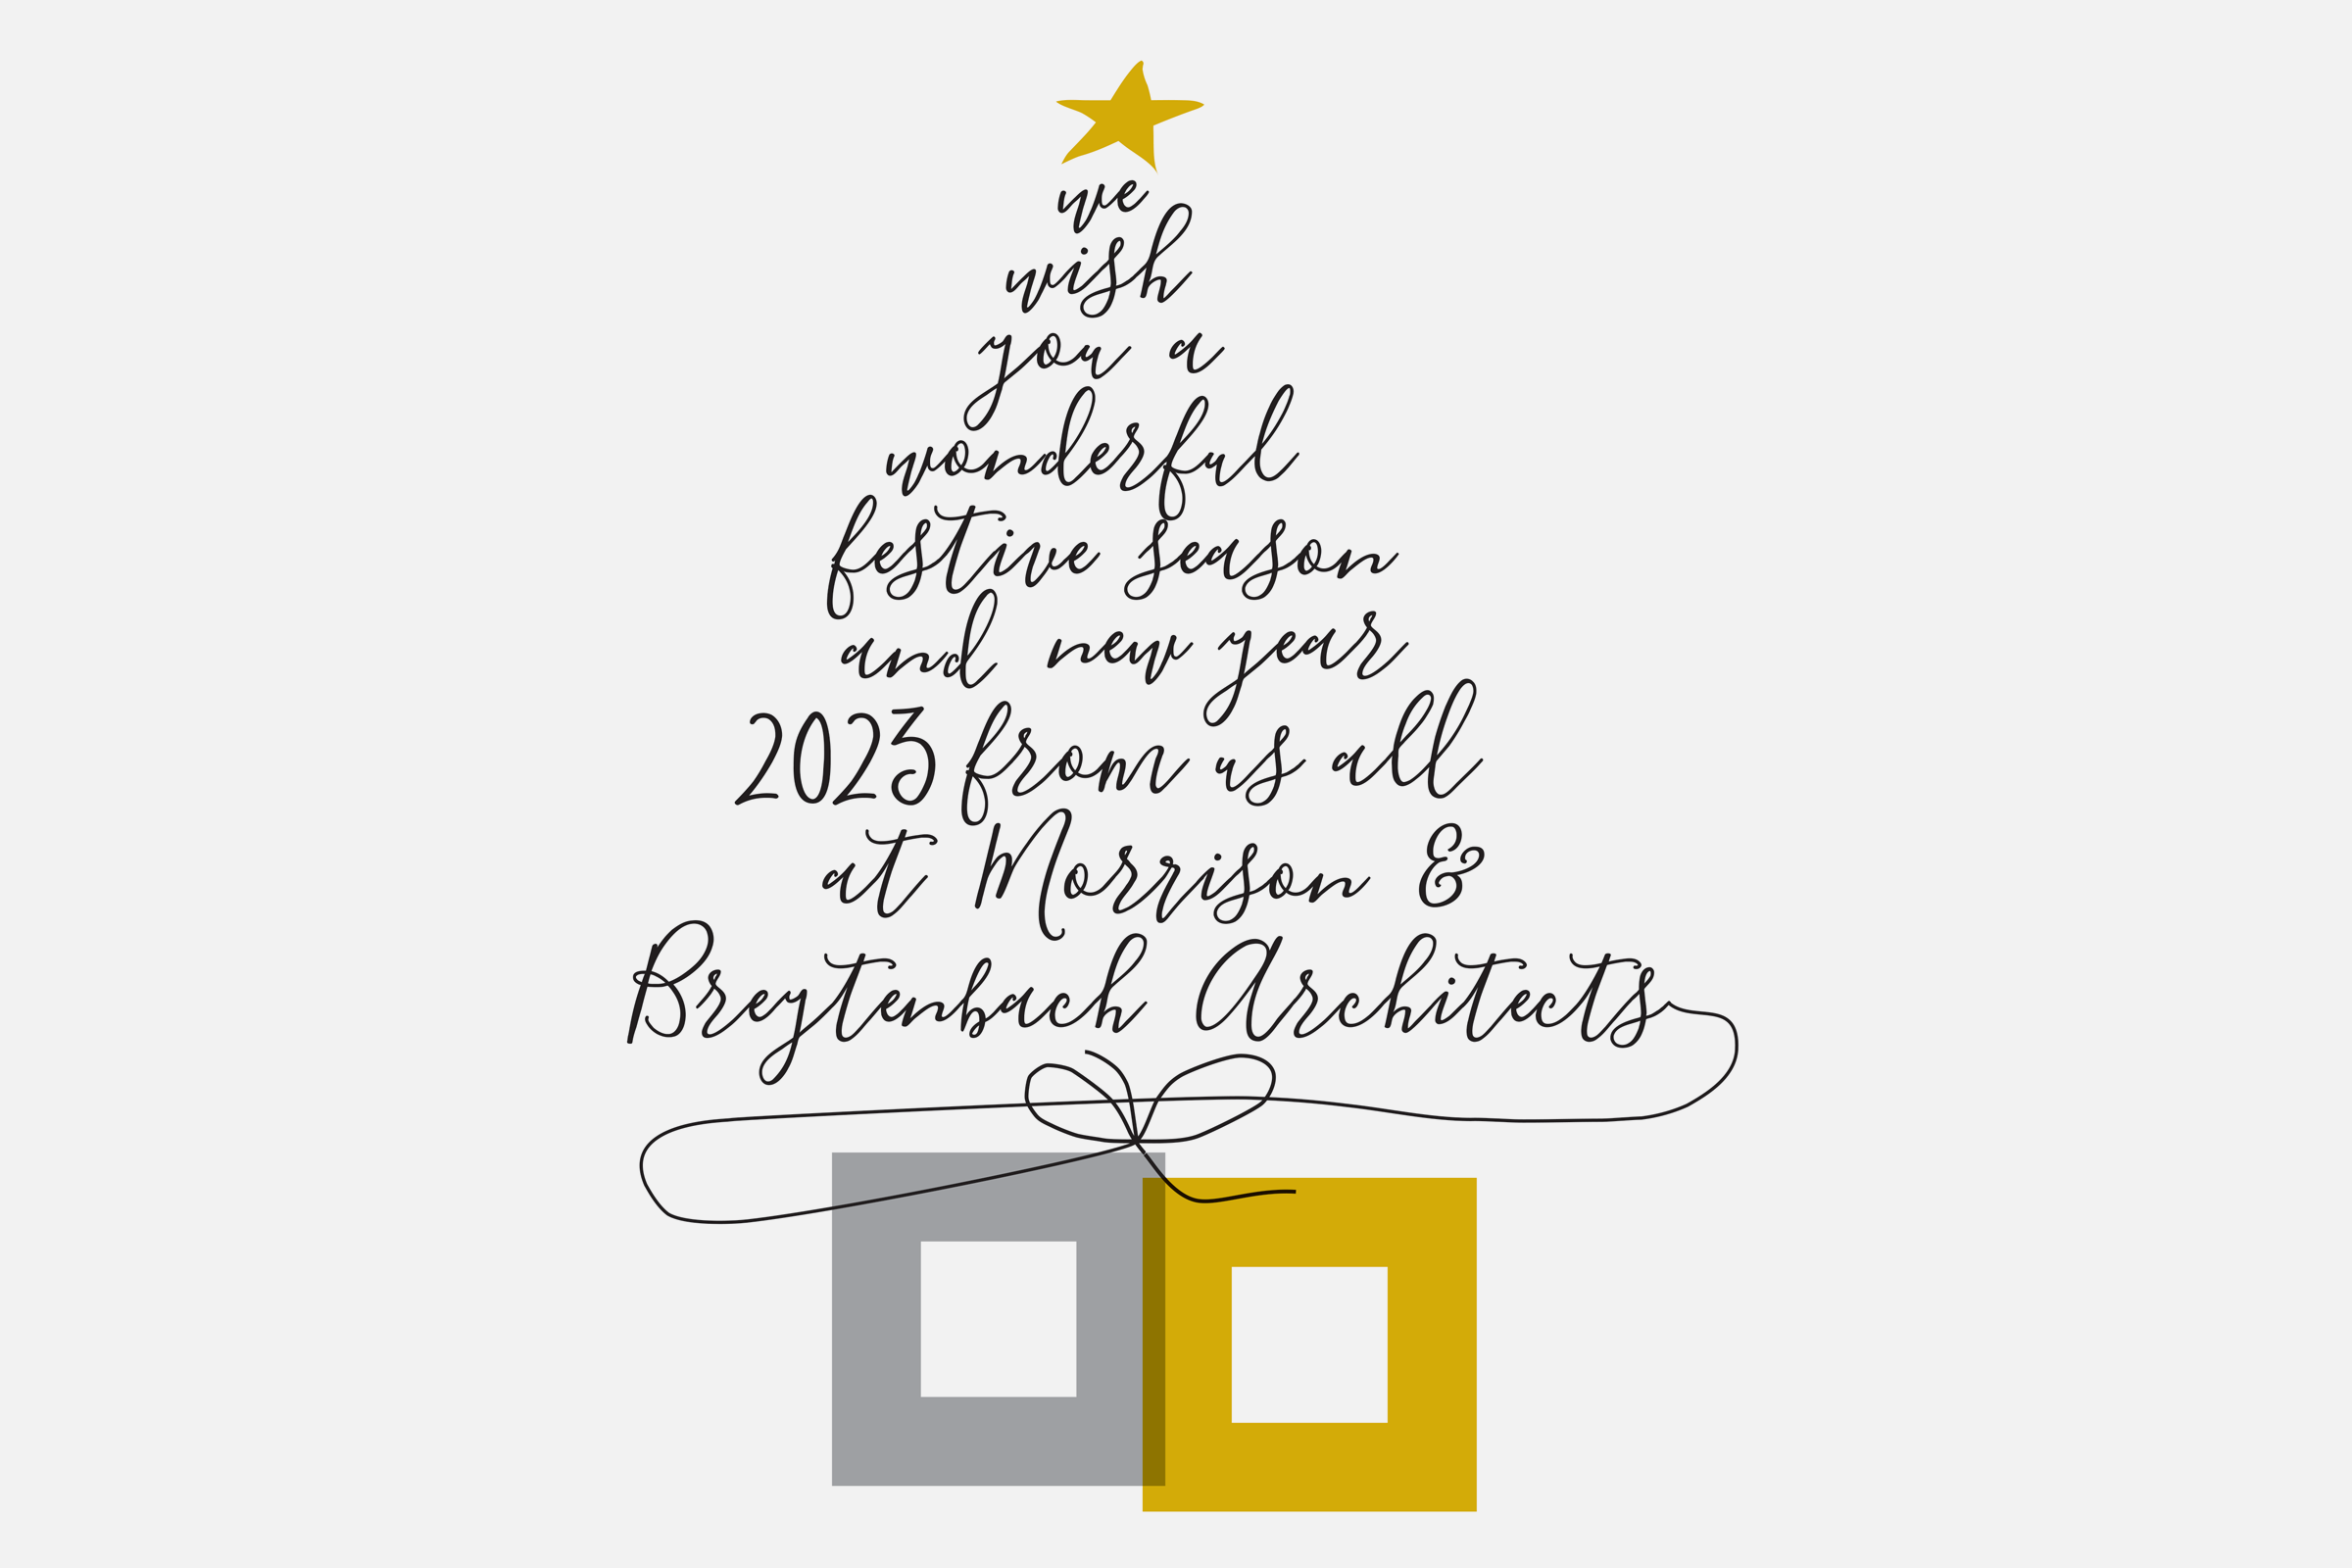 We wish you all a wonderful festive season and new year 2023 from us all at Morrison & Breytenbach Architects.